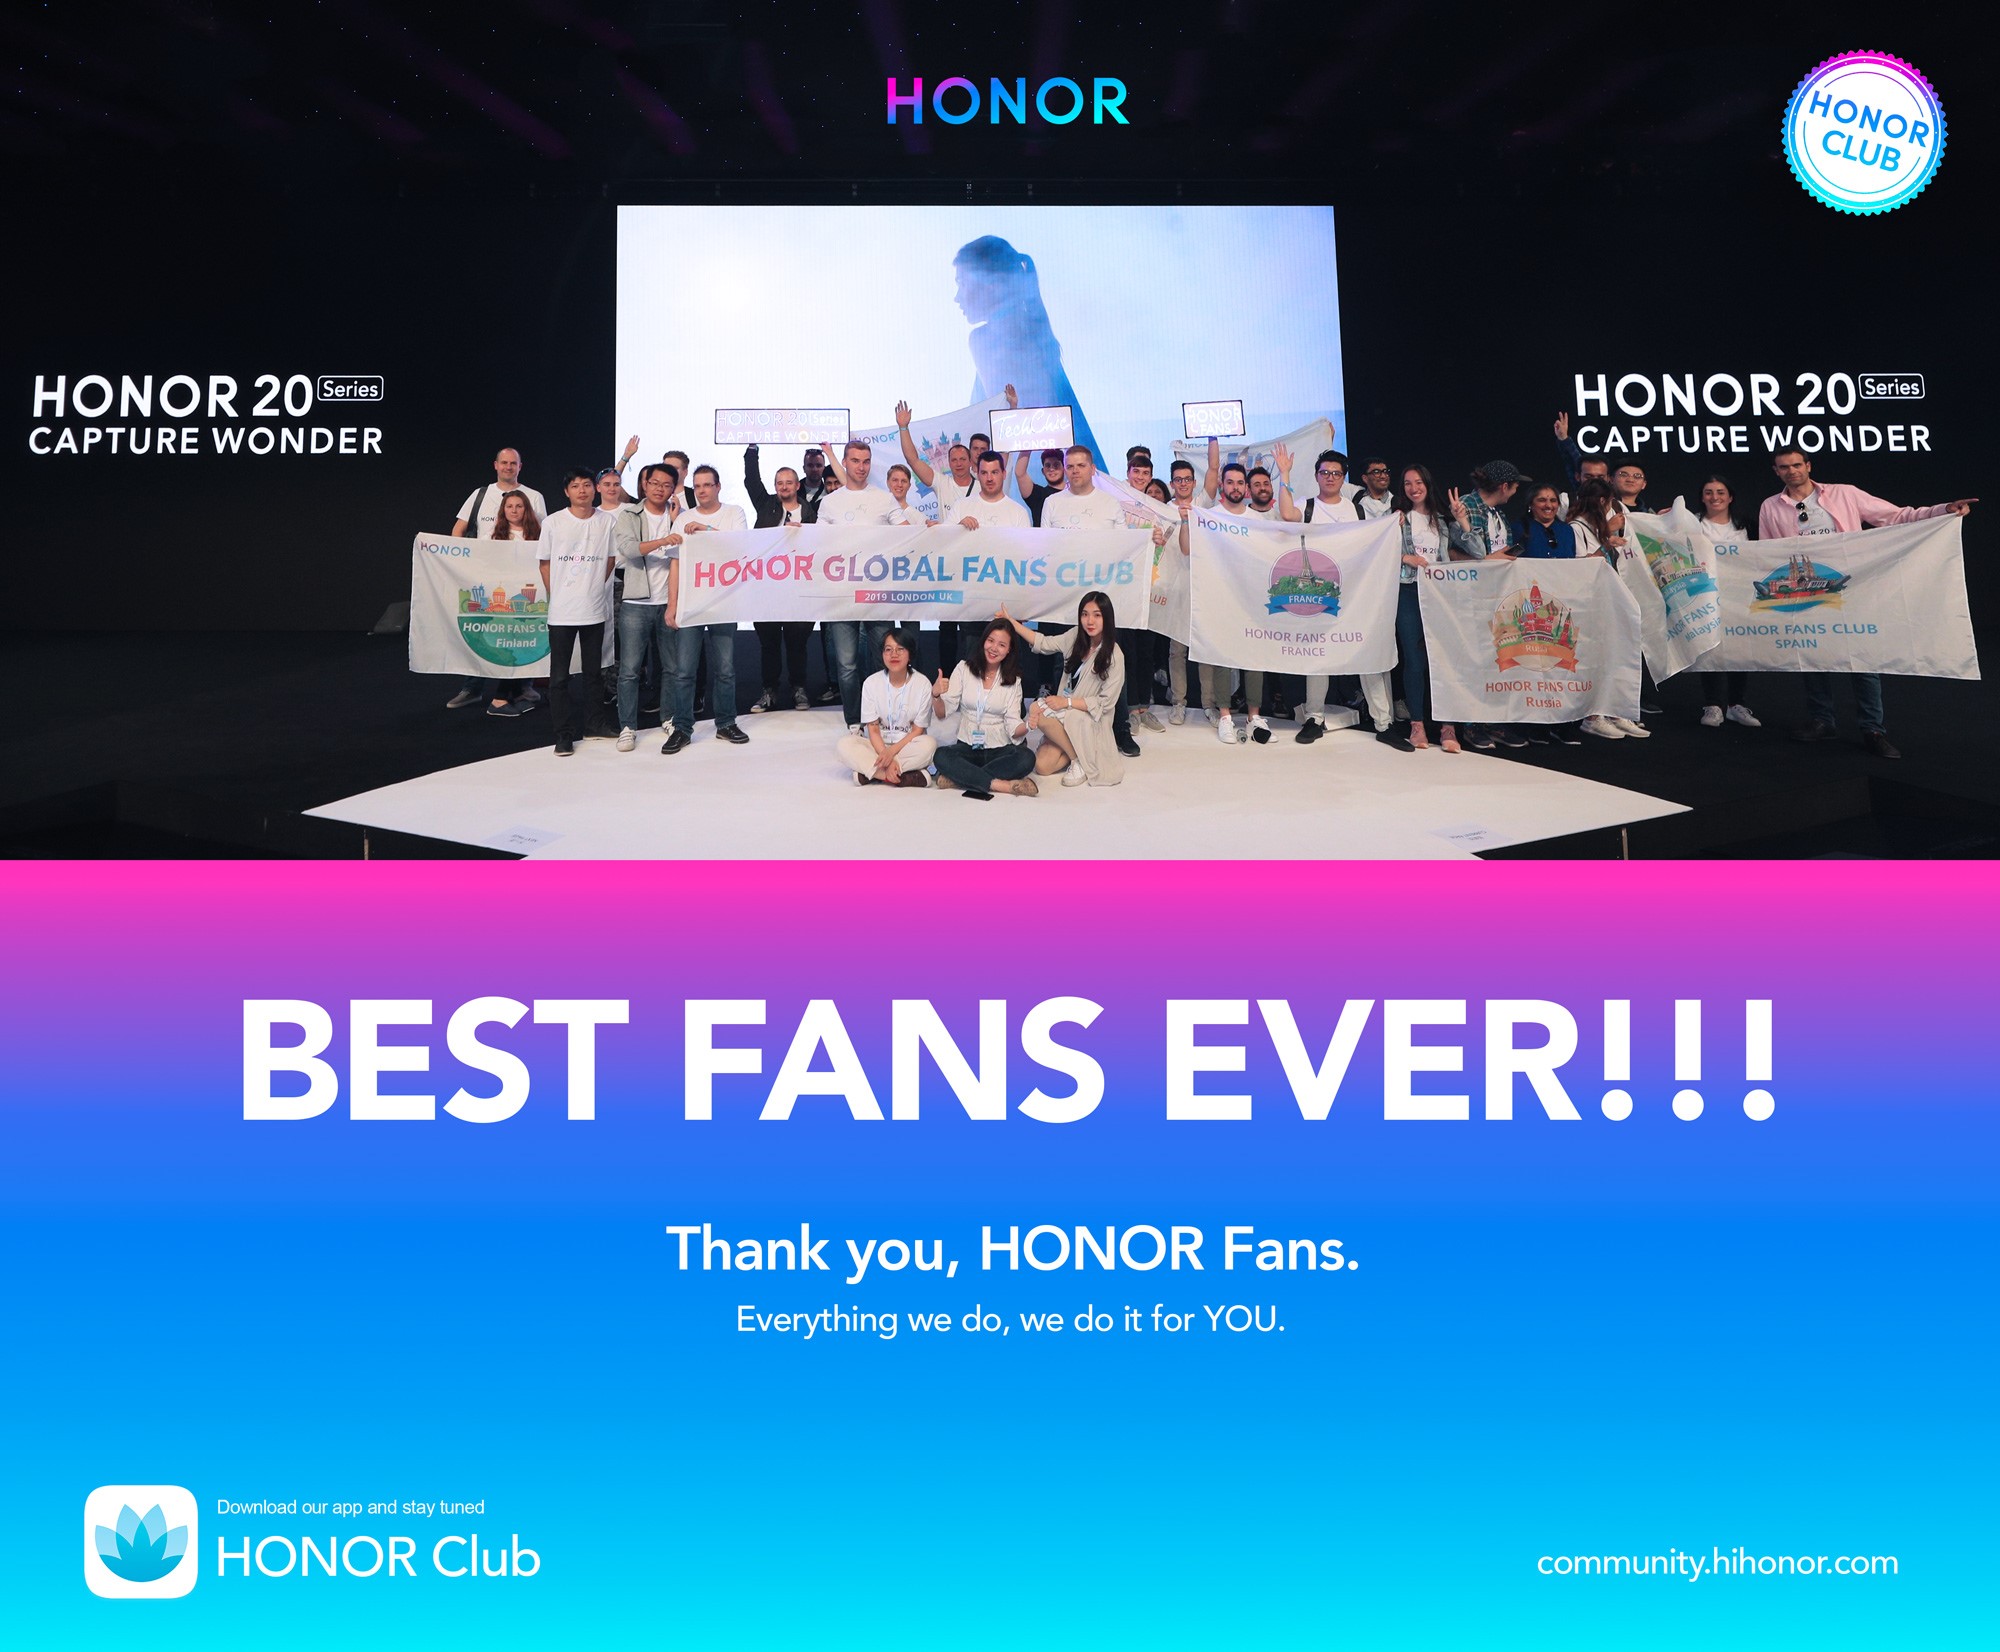 Video-HONOR-Fans-enjoying-the-debut-event-of-the-HONOR-20-Series